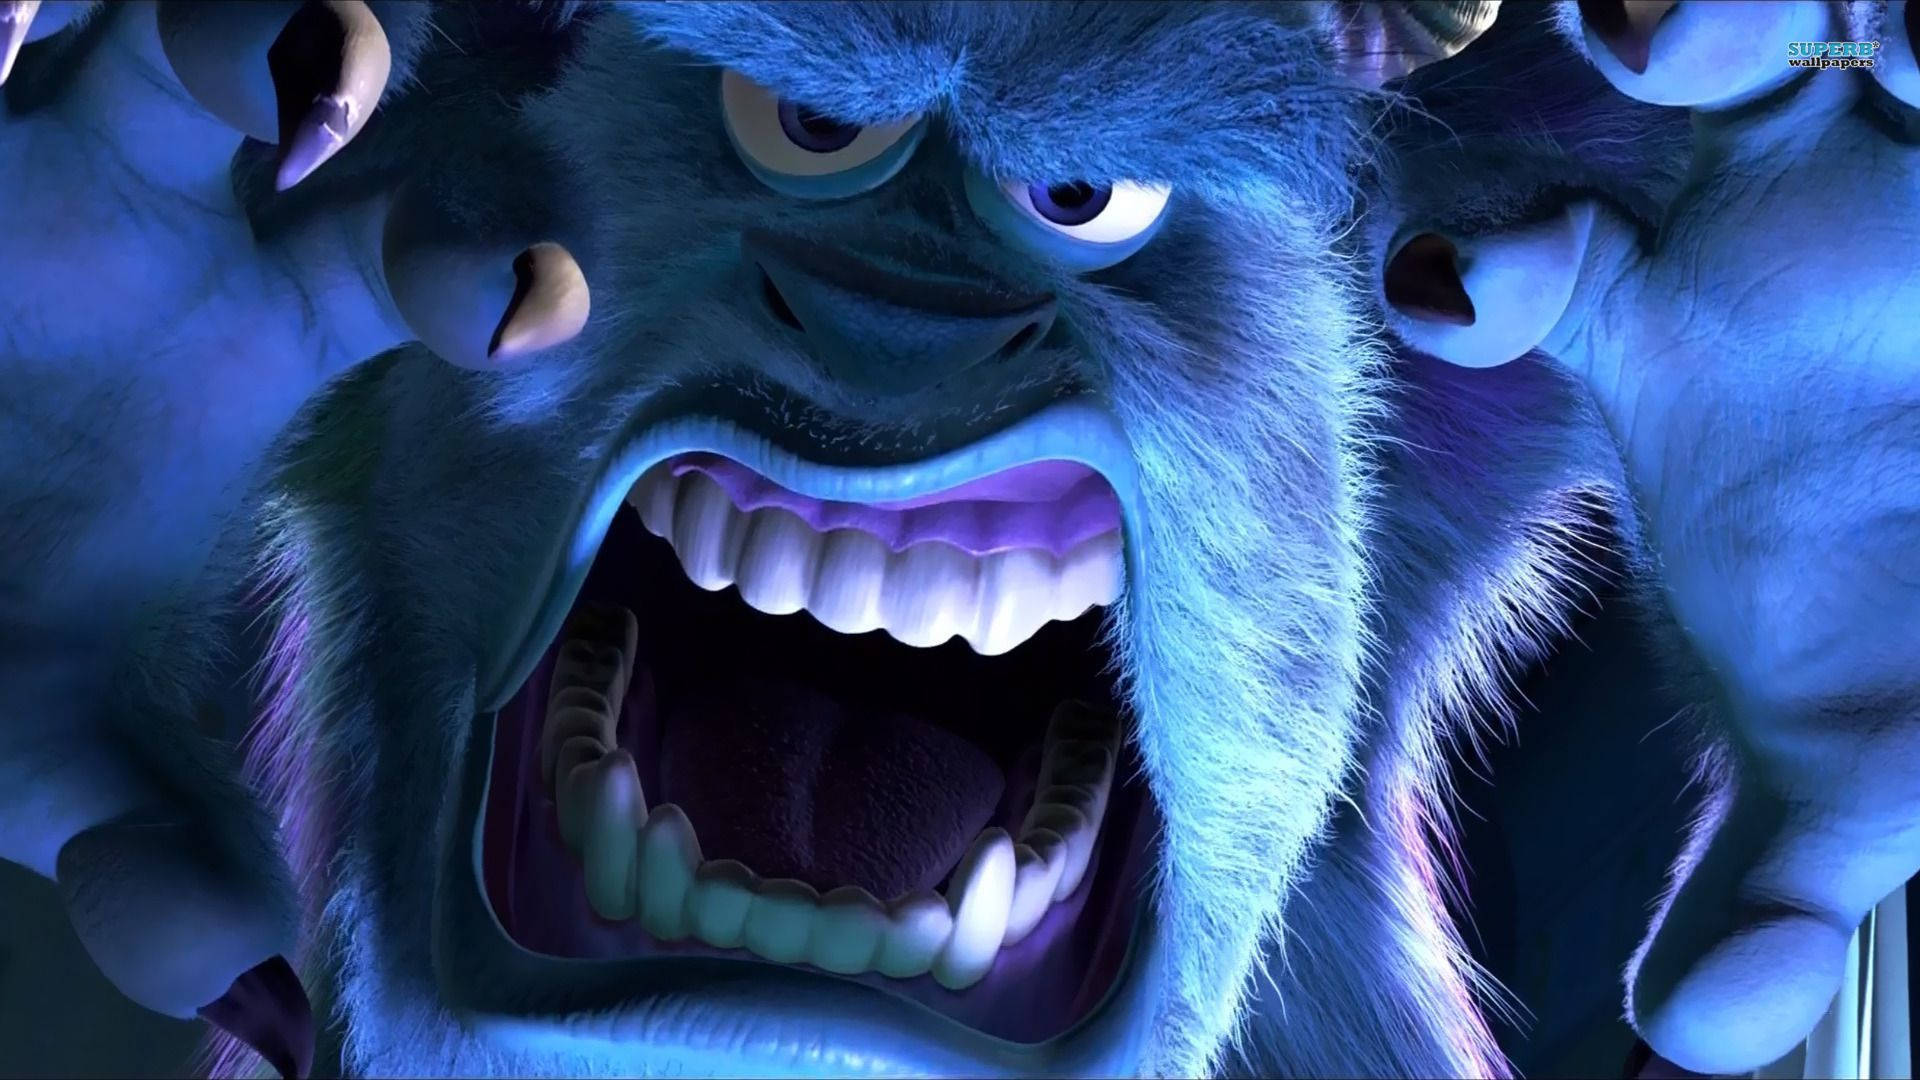 Sulley The Famous Scarer Background